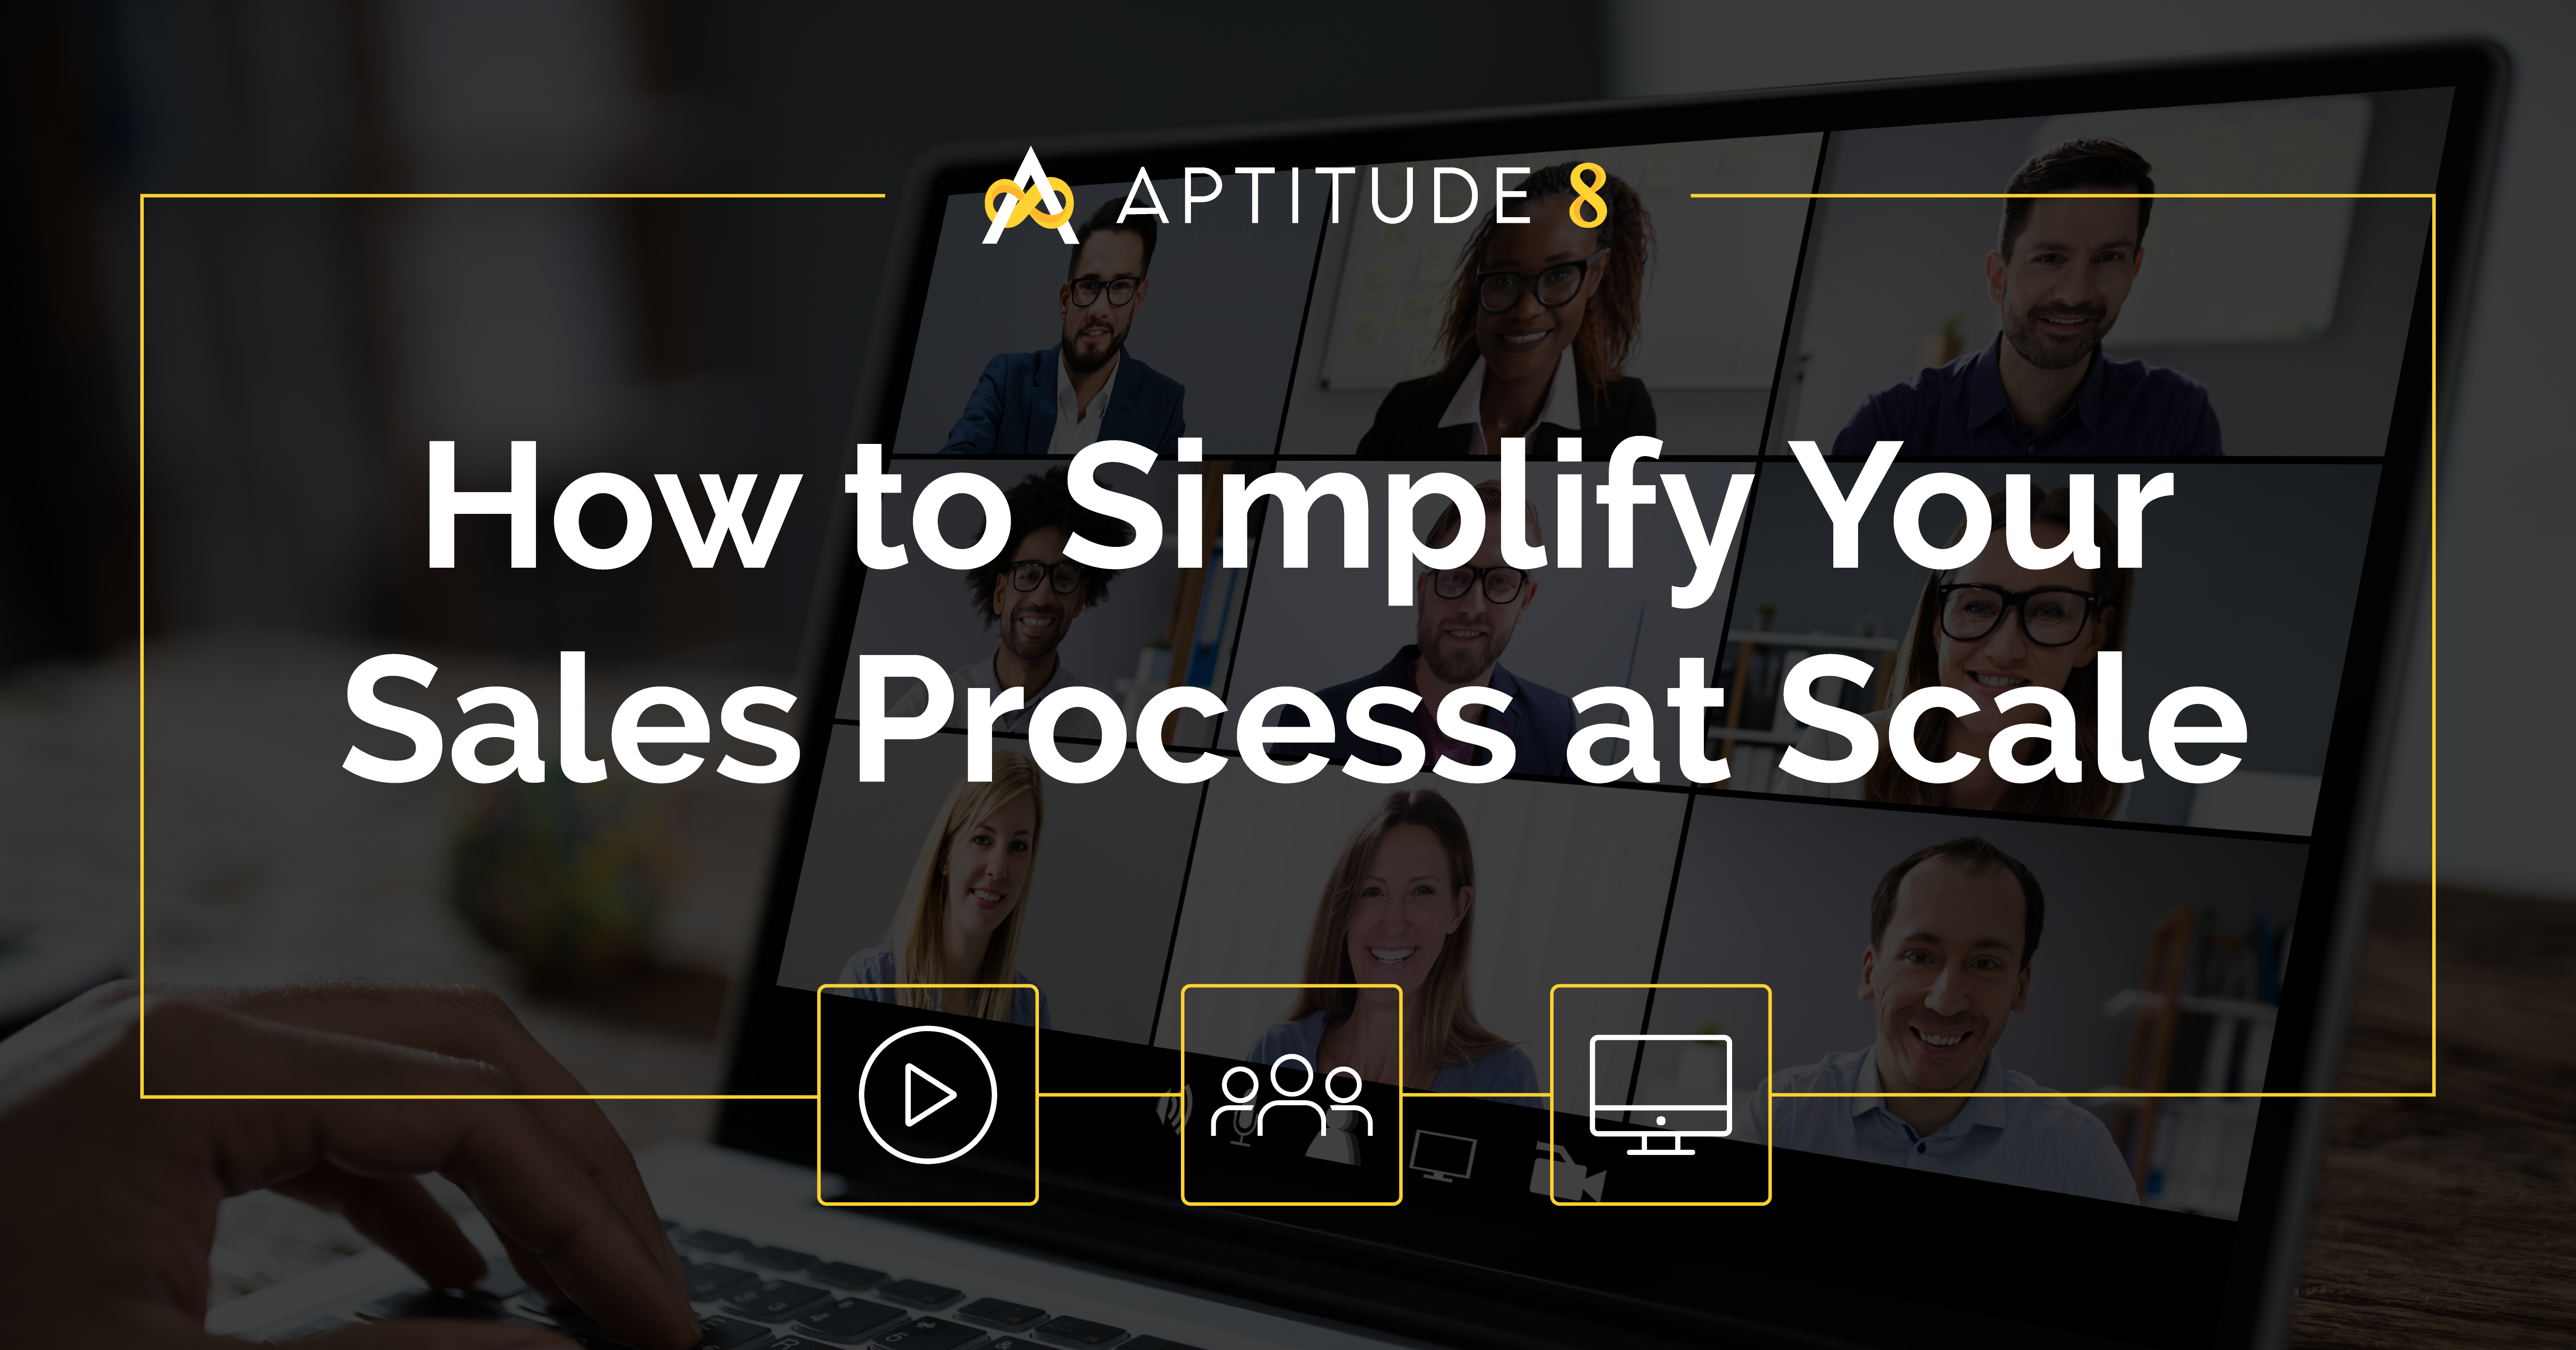 How to Simplify Your Sales Process at Scale